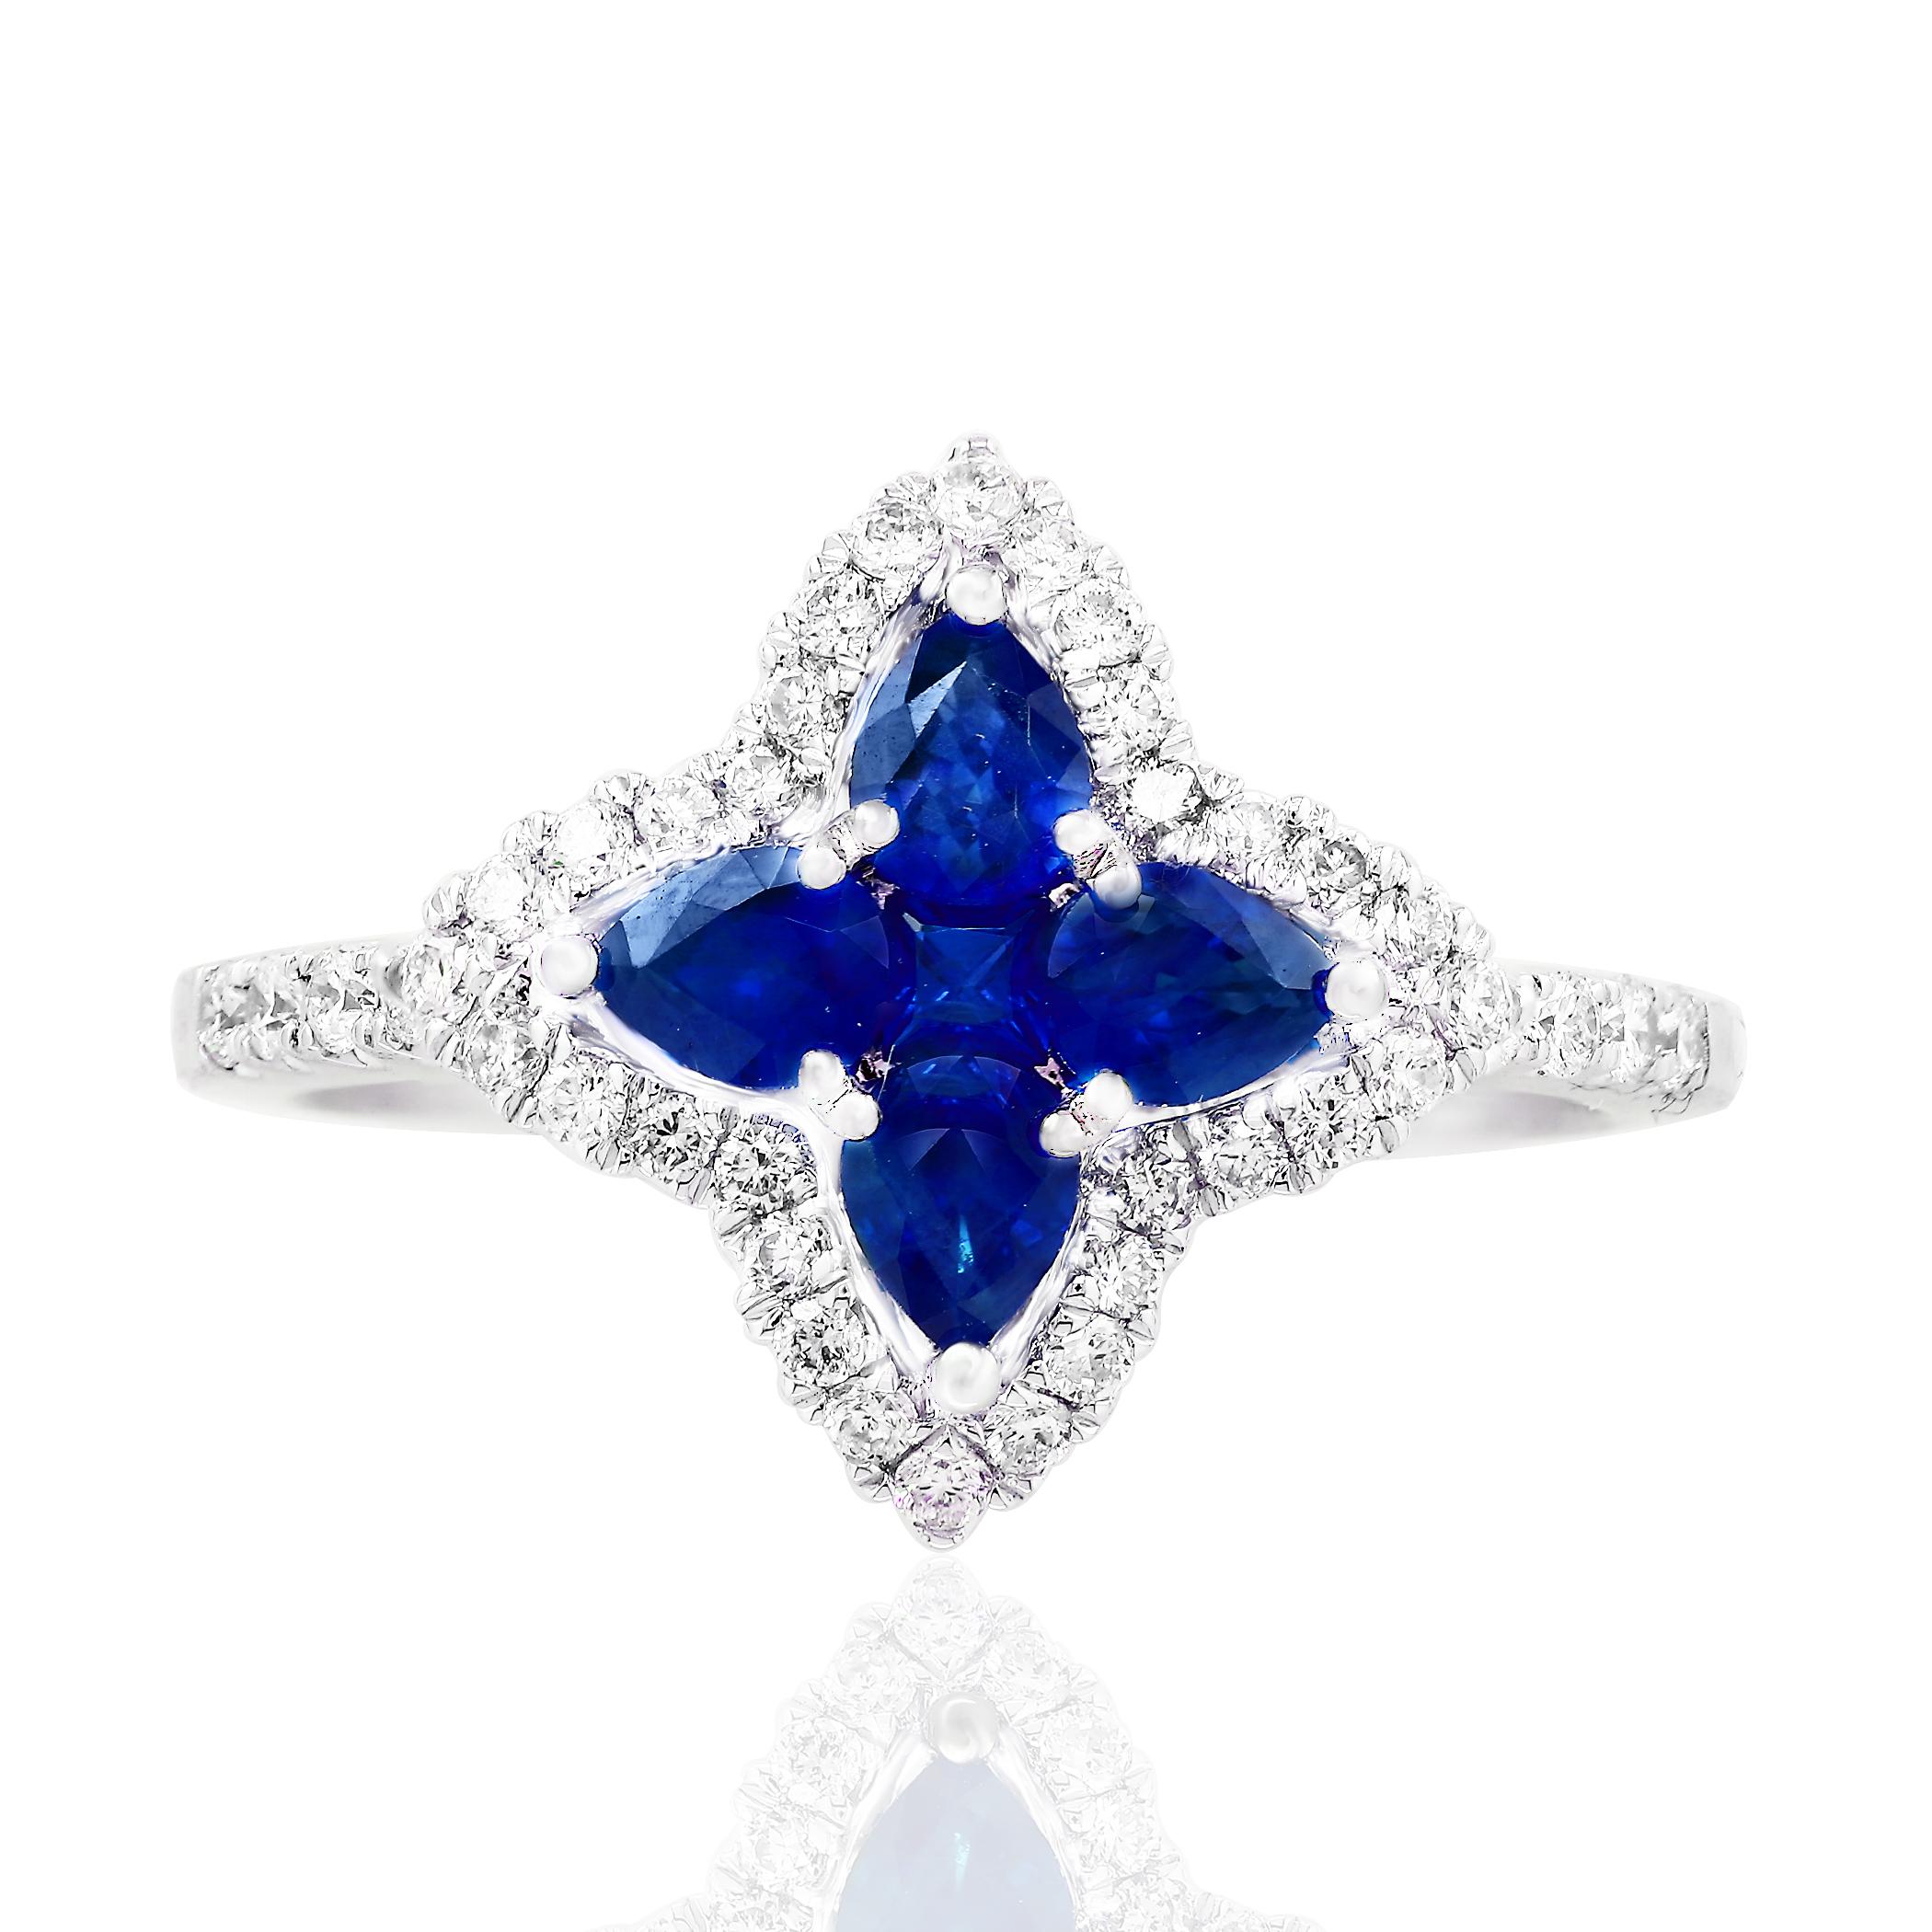 Showcasing flower design color-rich ring with 4 pear shape sapphires weighing 0.70 carats total and 1 round shape sapphire weighing 0.07 carat, accented by a row of round brilliant diamonds. Diamonds weigh 0.35 carats total. Set in a polished 18K